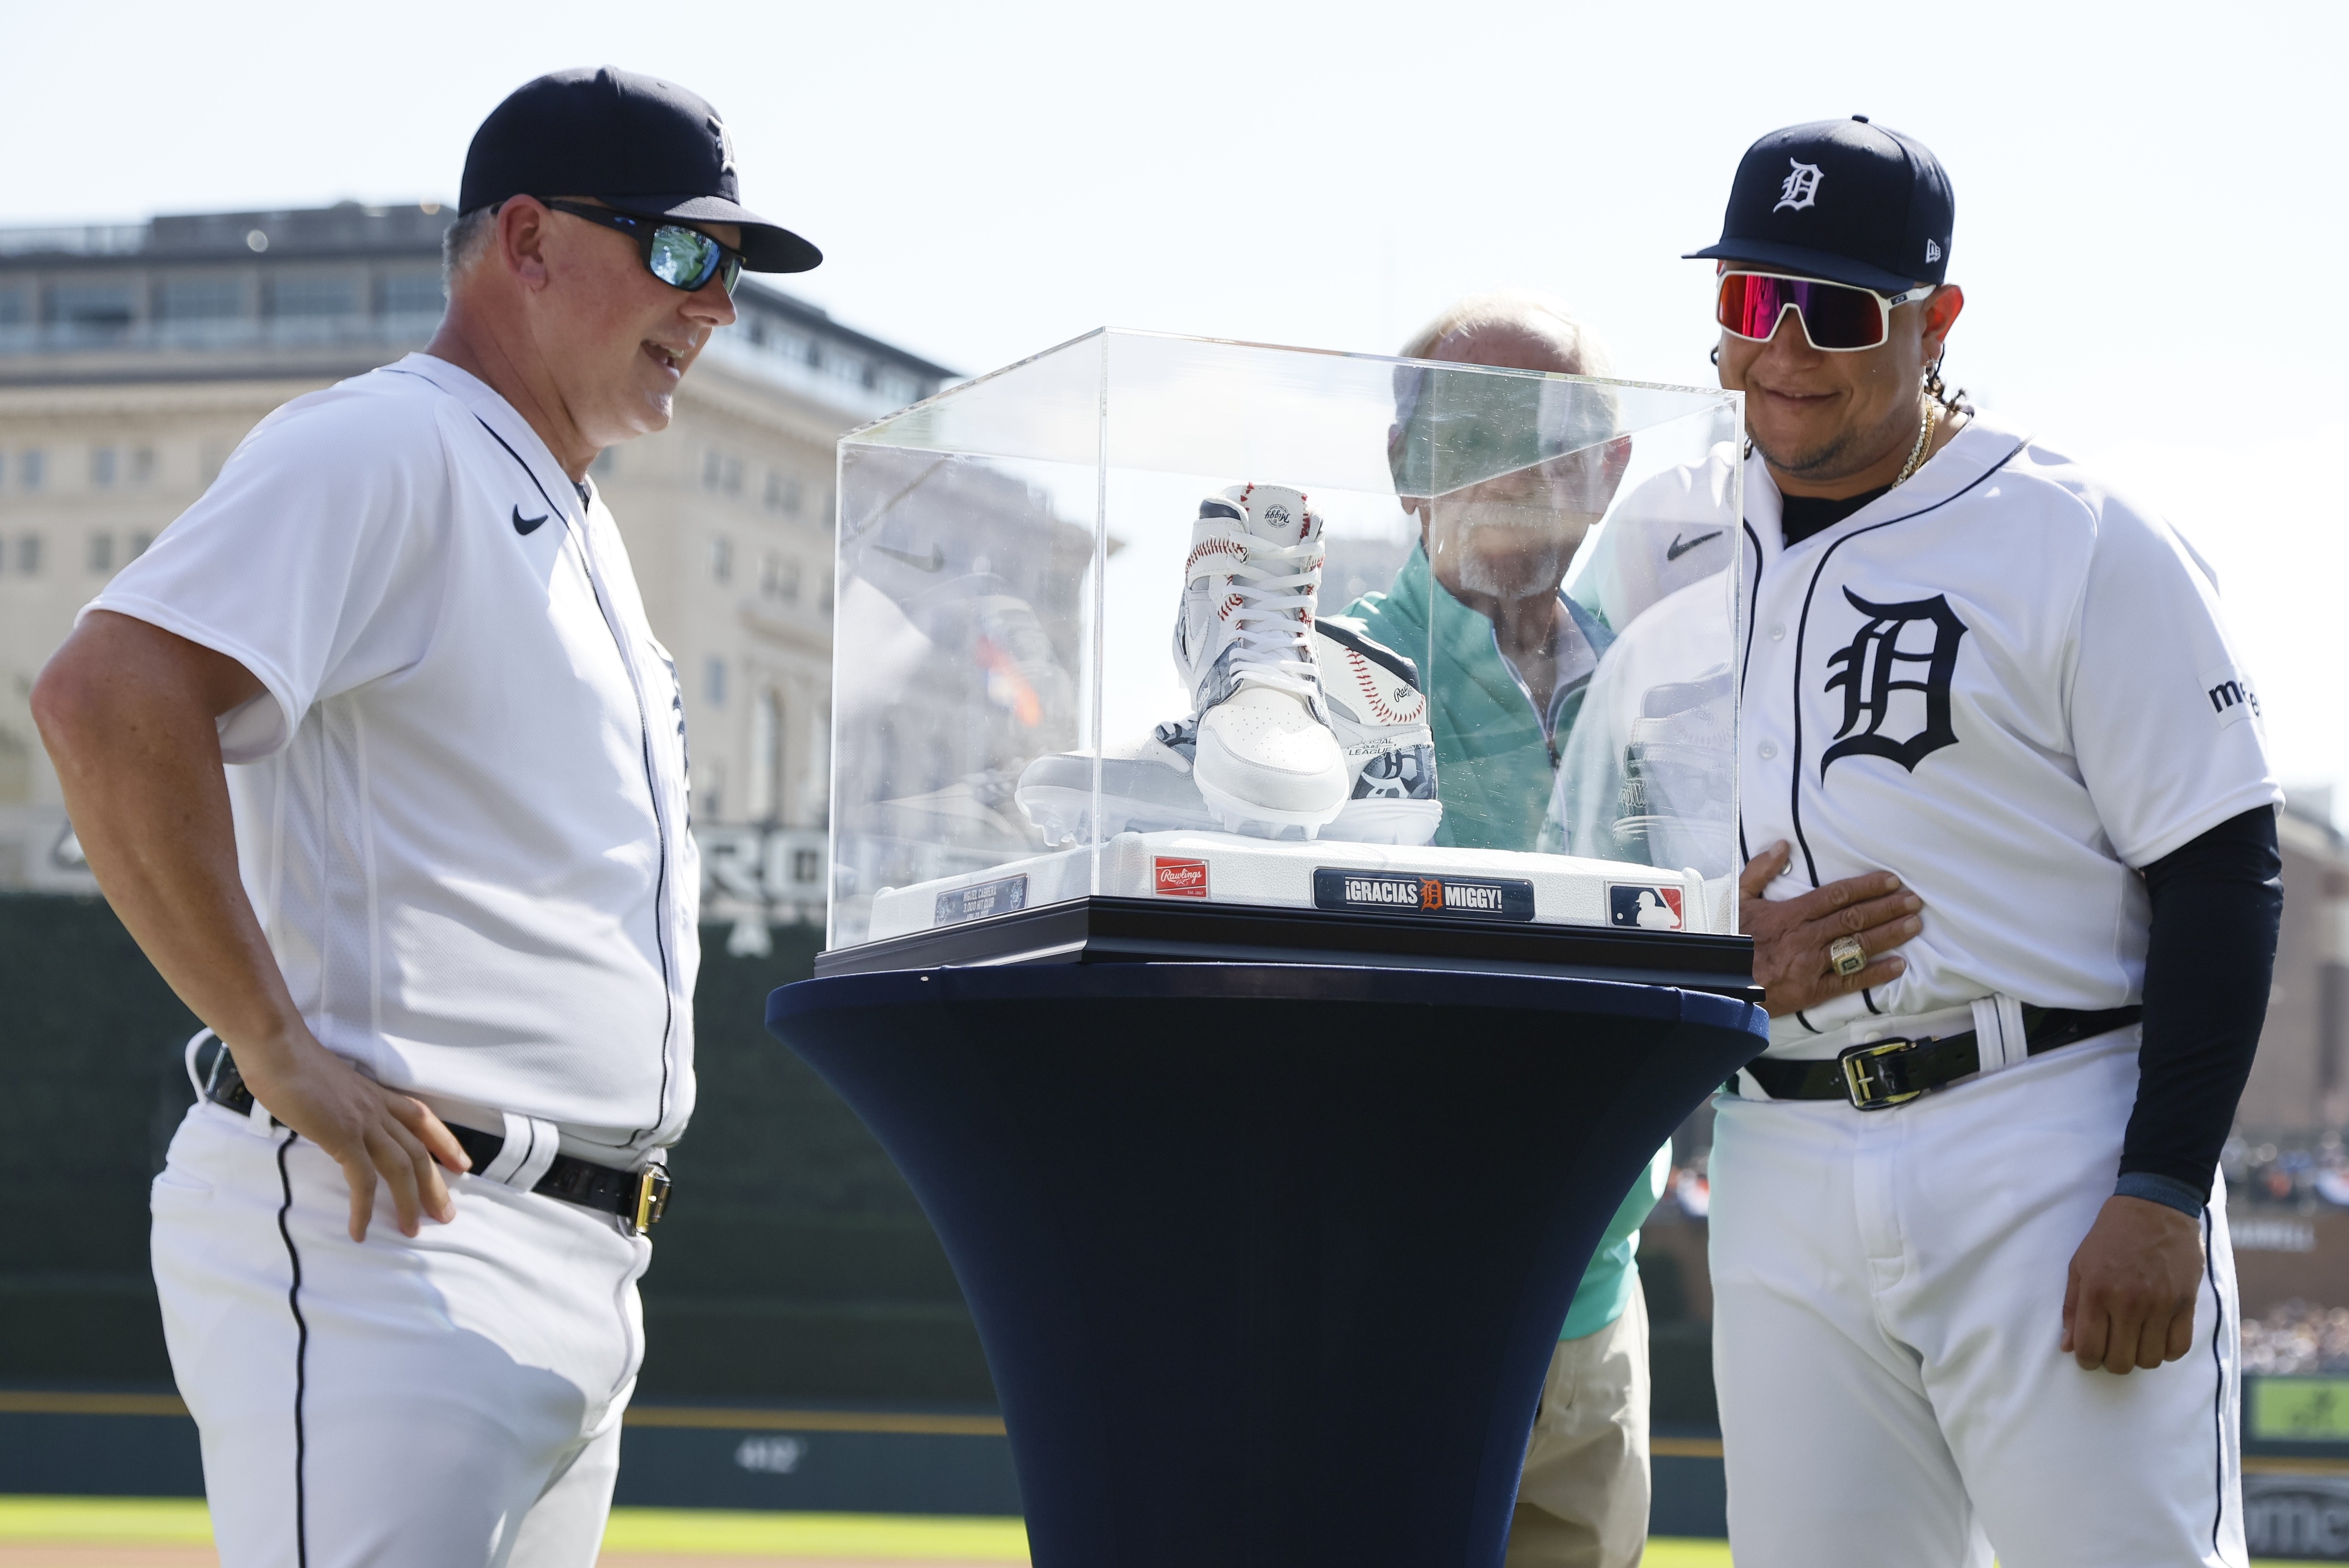 Miguel Cabrera joins 3,000 hit club vs. Rockies - Sports Illustrated